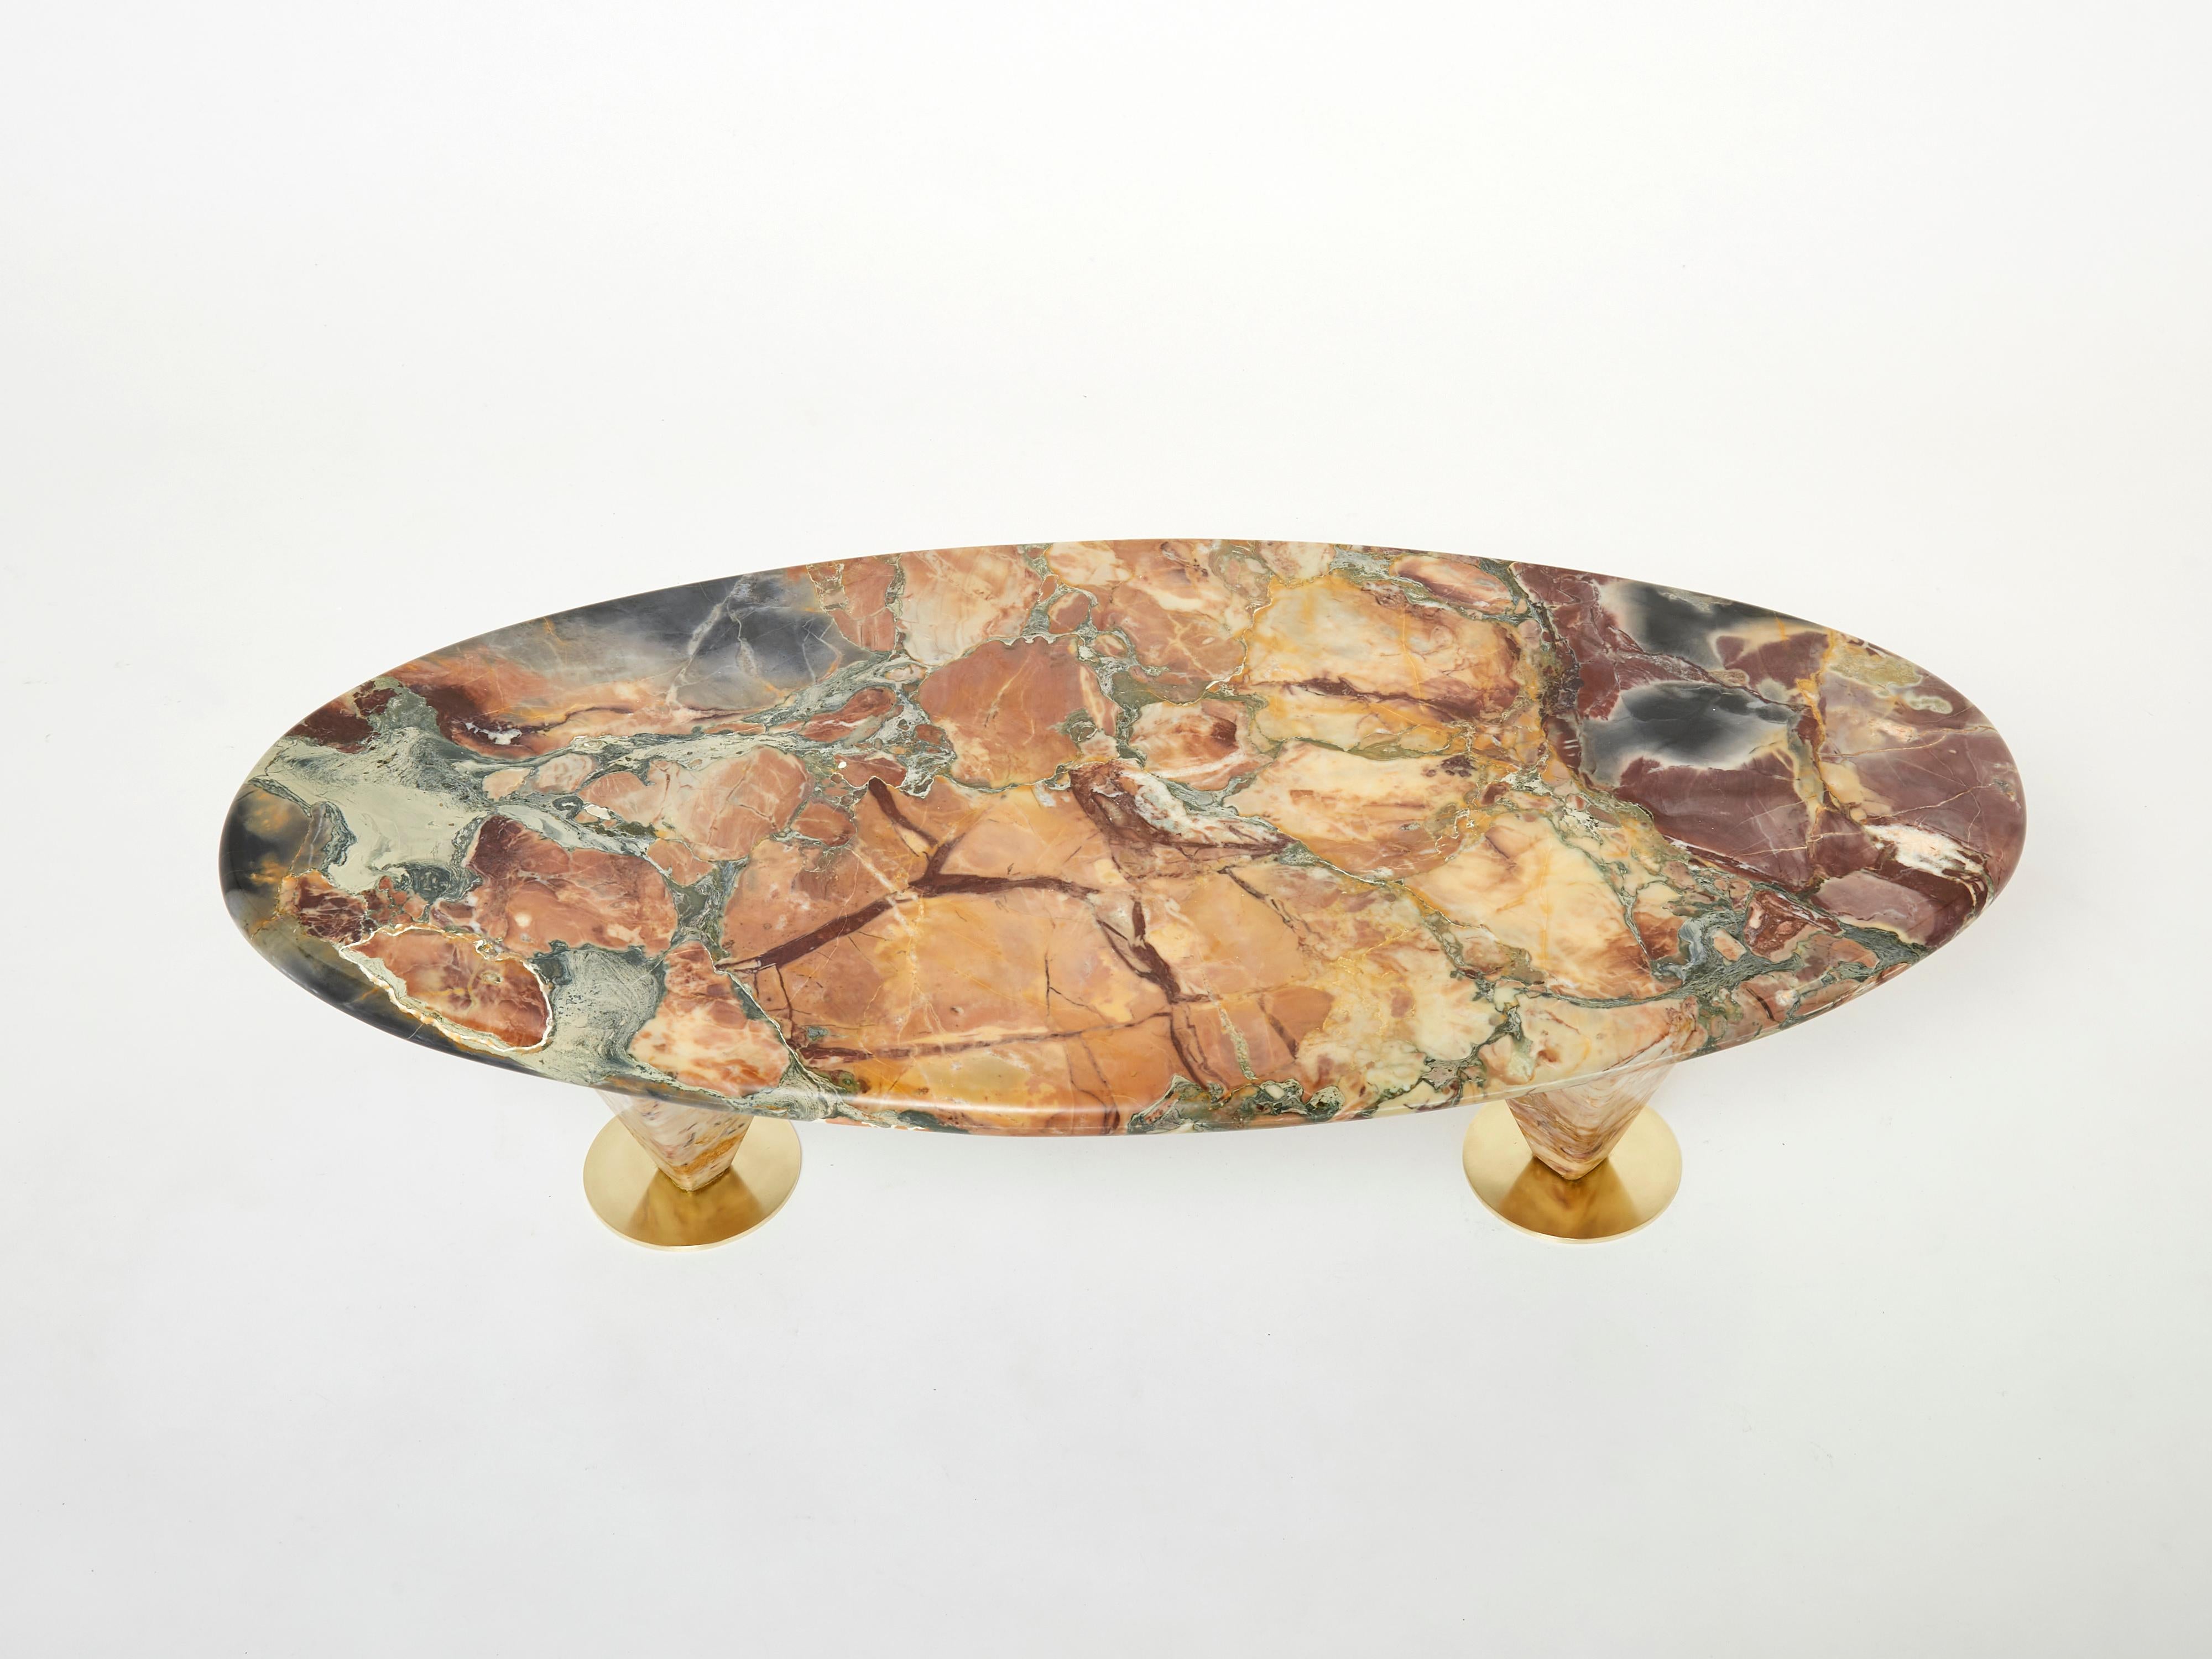 Beautiful oval shaped with free form feet coffee table made in France in the early 1980s from a beautiful Pyrénées marble called Brèche de Benou or Brèche de Vendôme. Each foot, in solid marble, is finished by a solid brass disk. The Brèche du Benou